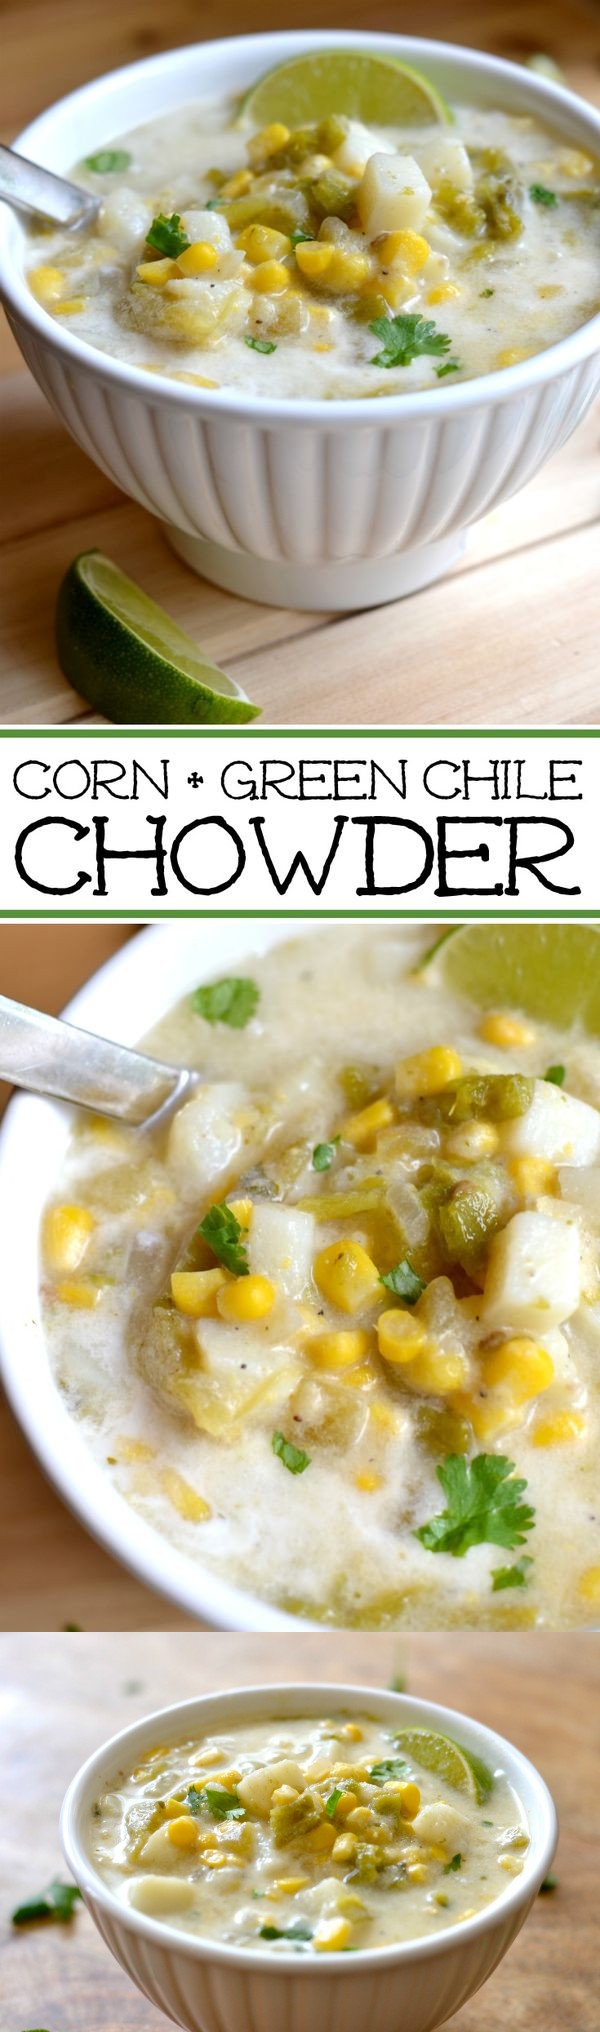 Green Chile and Corn Chowder